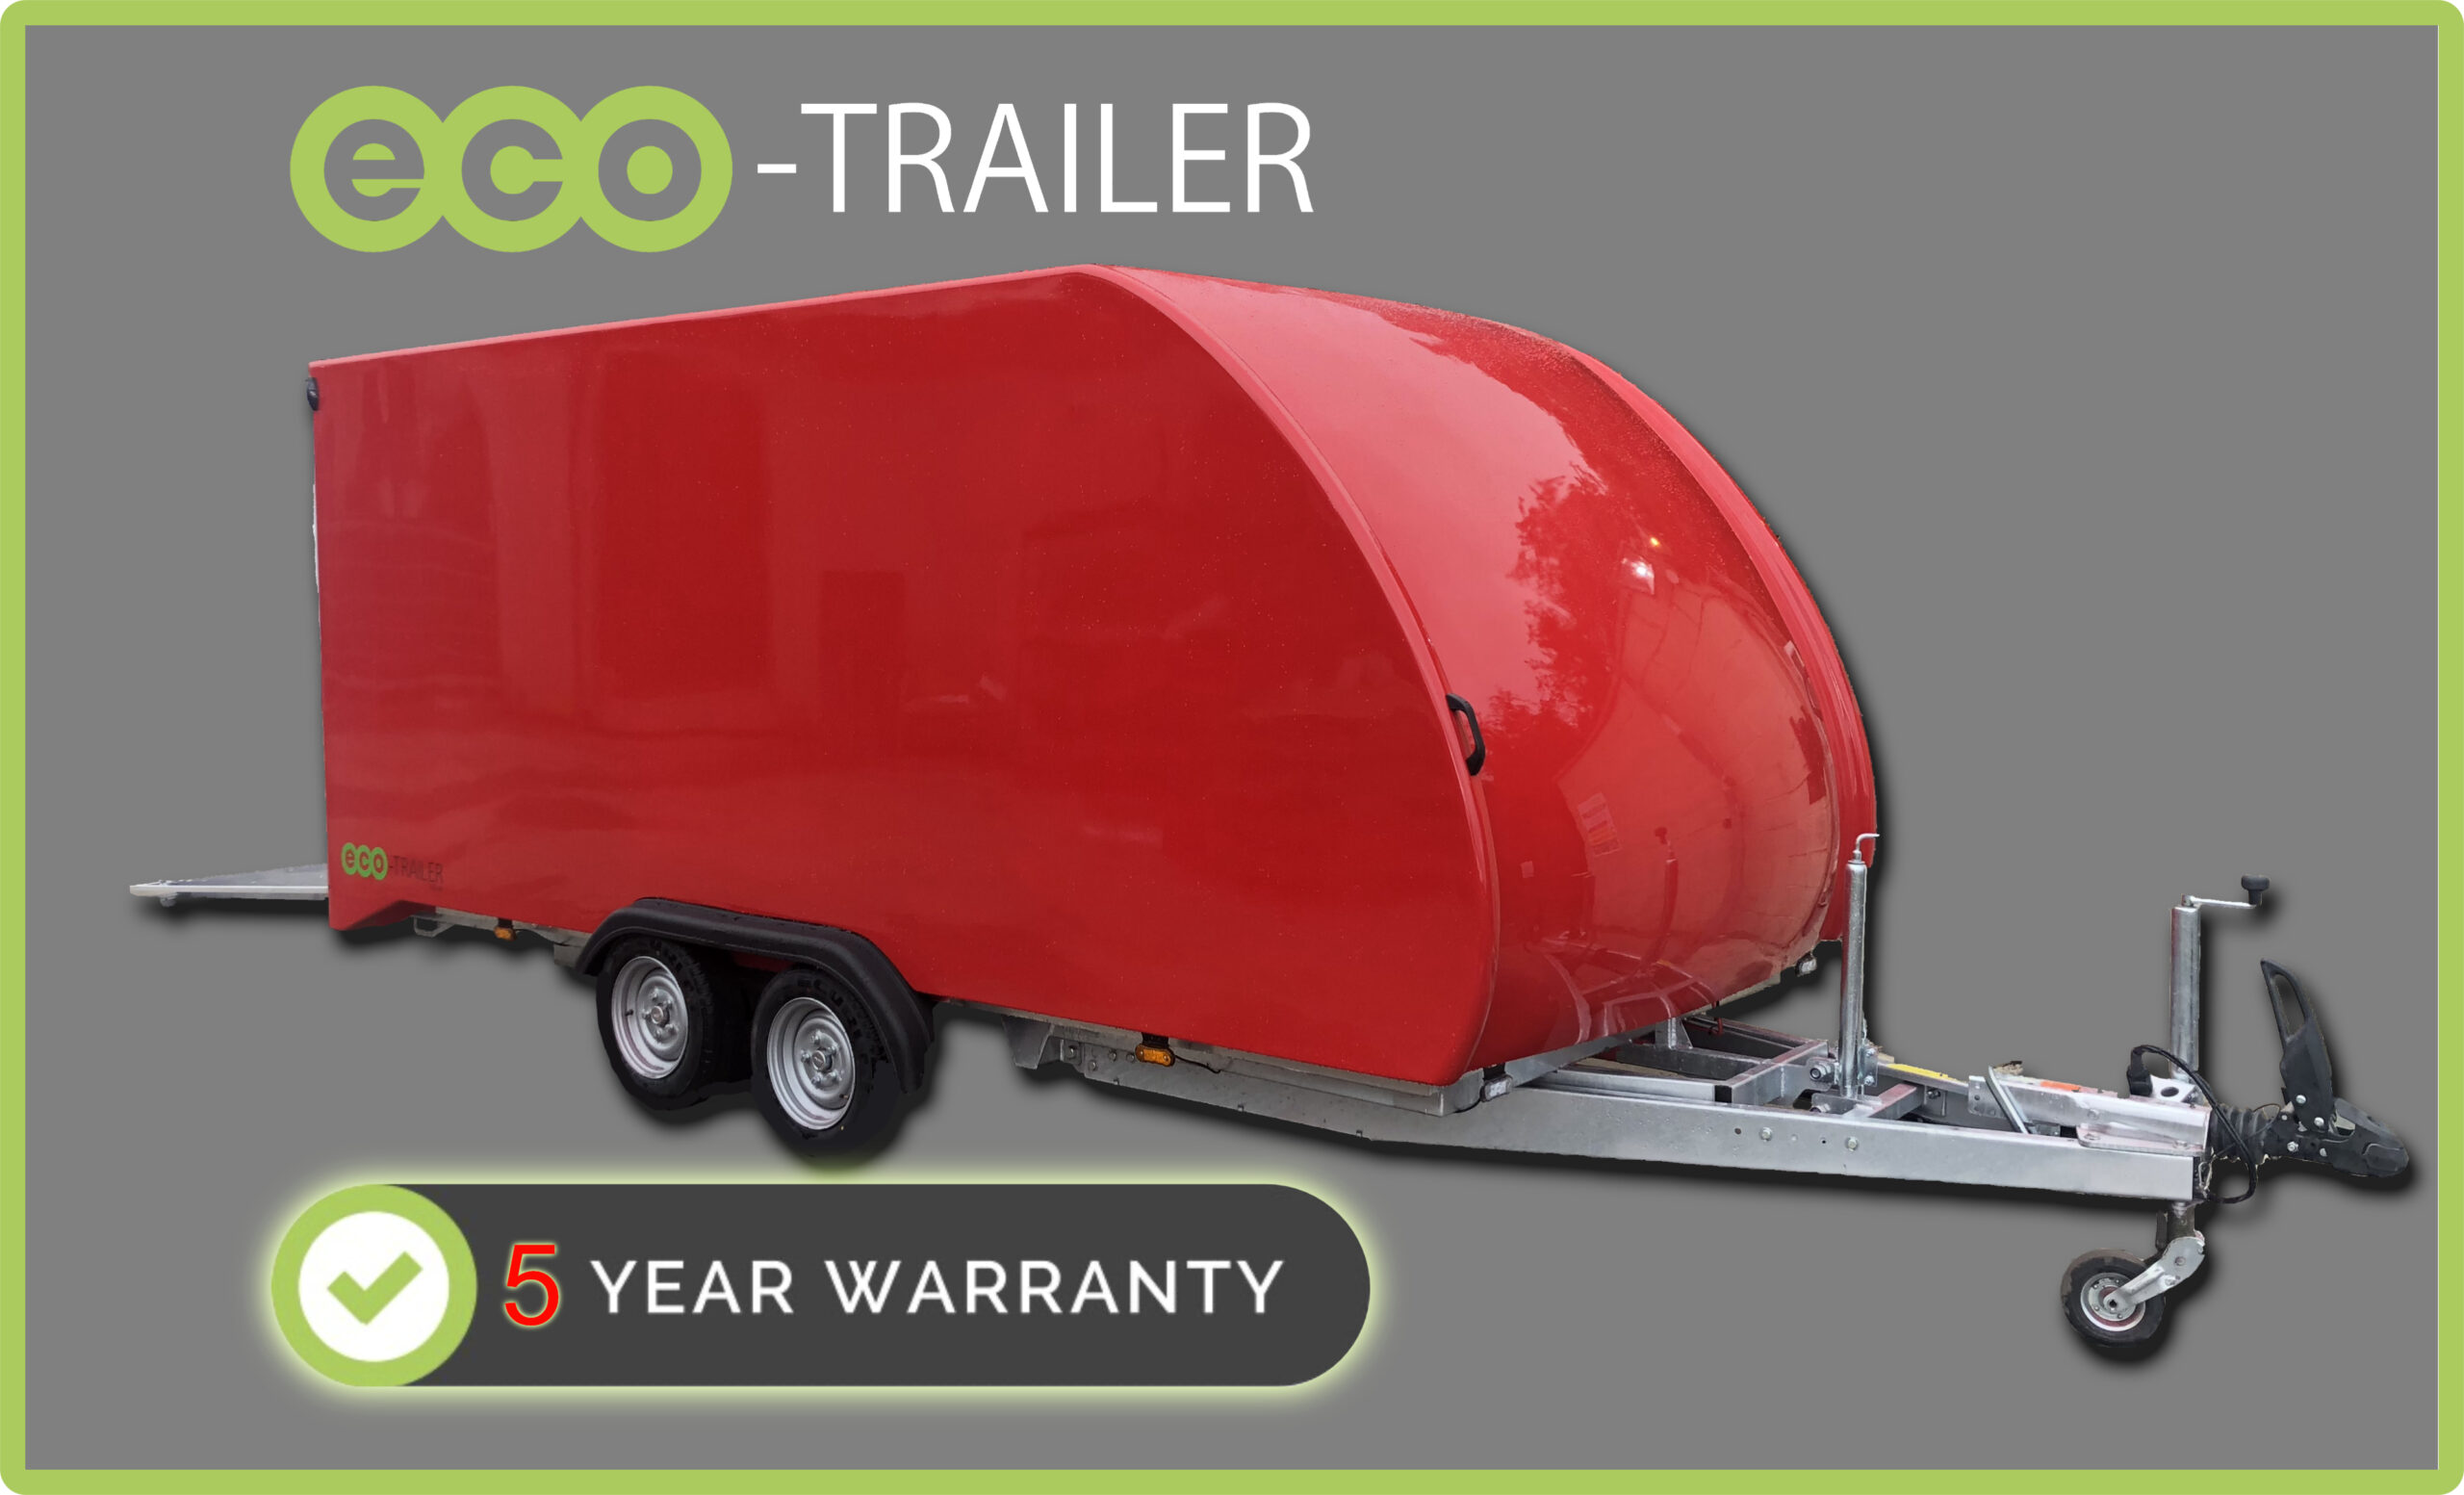 Red enclosed trailer in front of a grey background with the eco trailer logo and a 5 year warranty badge